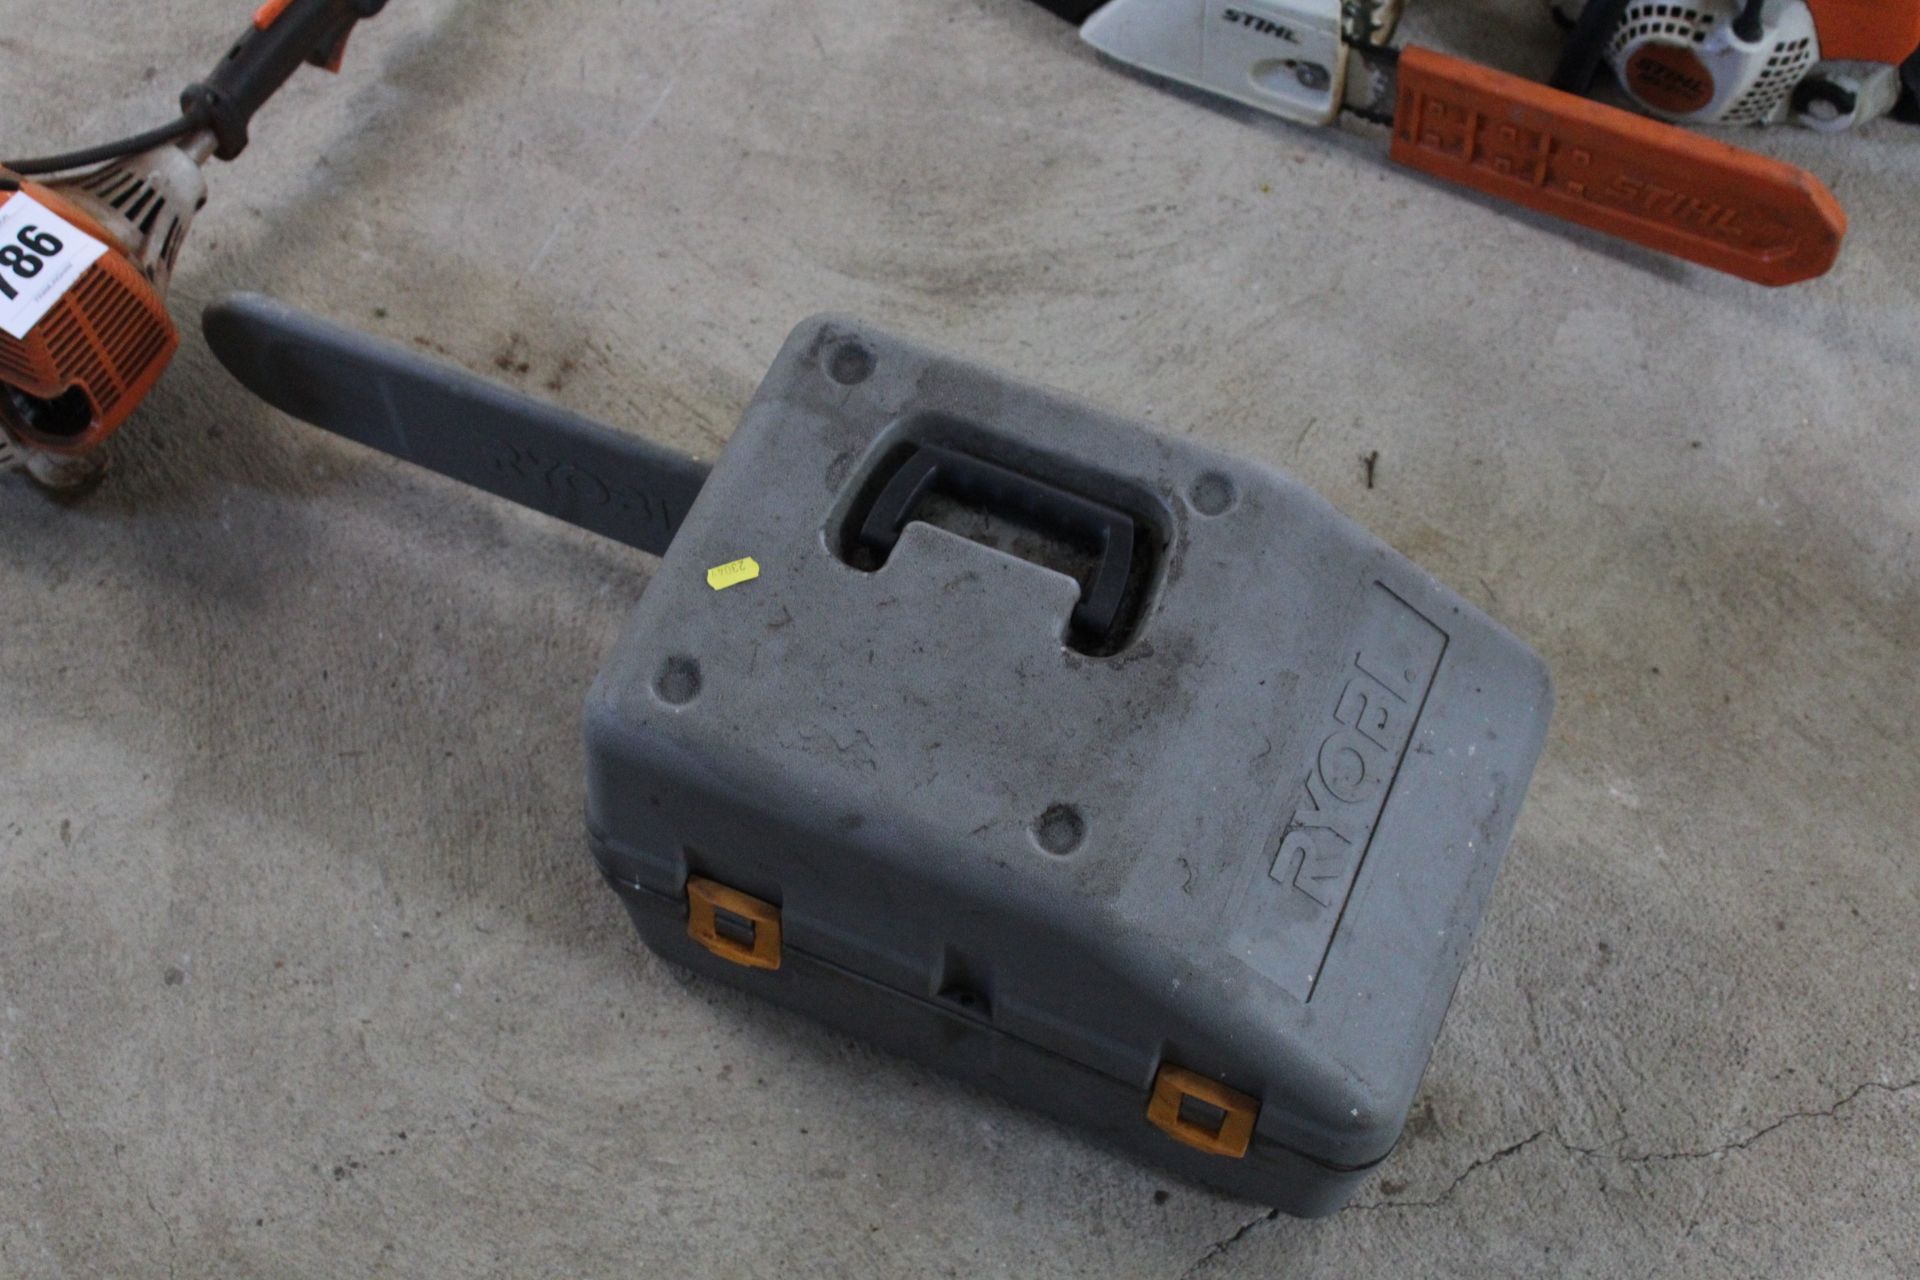 Ryobi petrol chainsaw and case. - Image 6 of 6